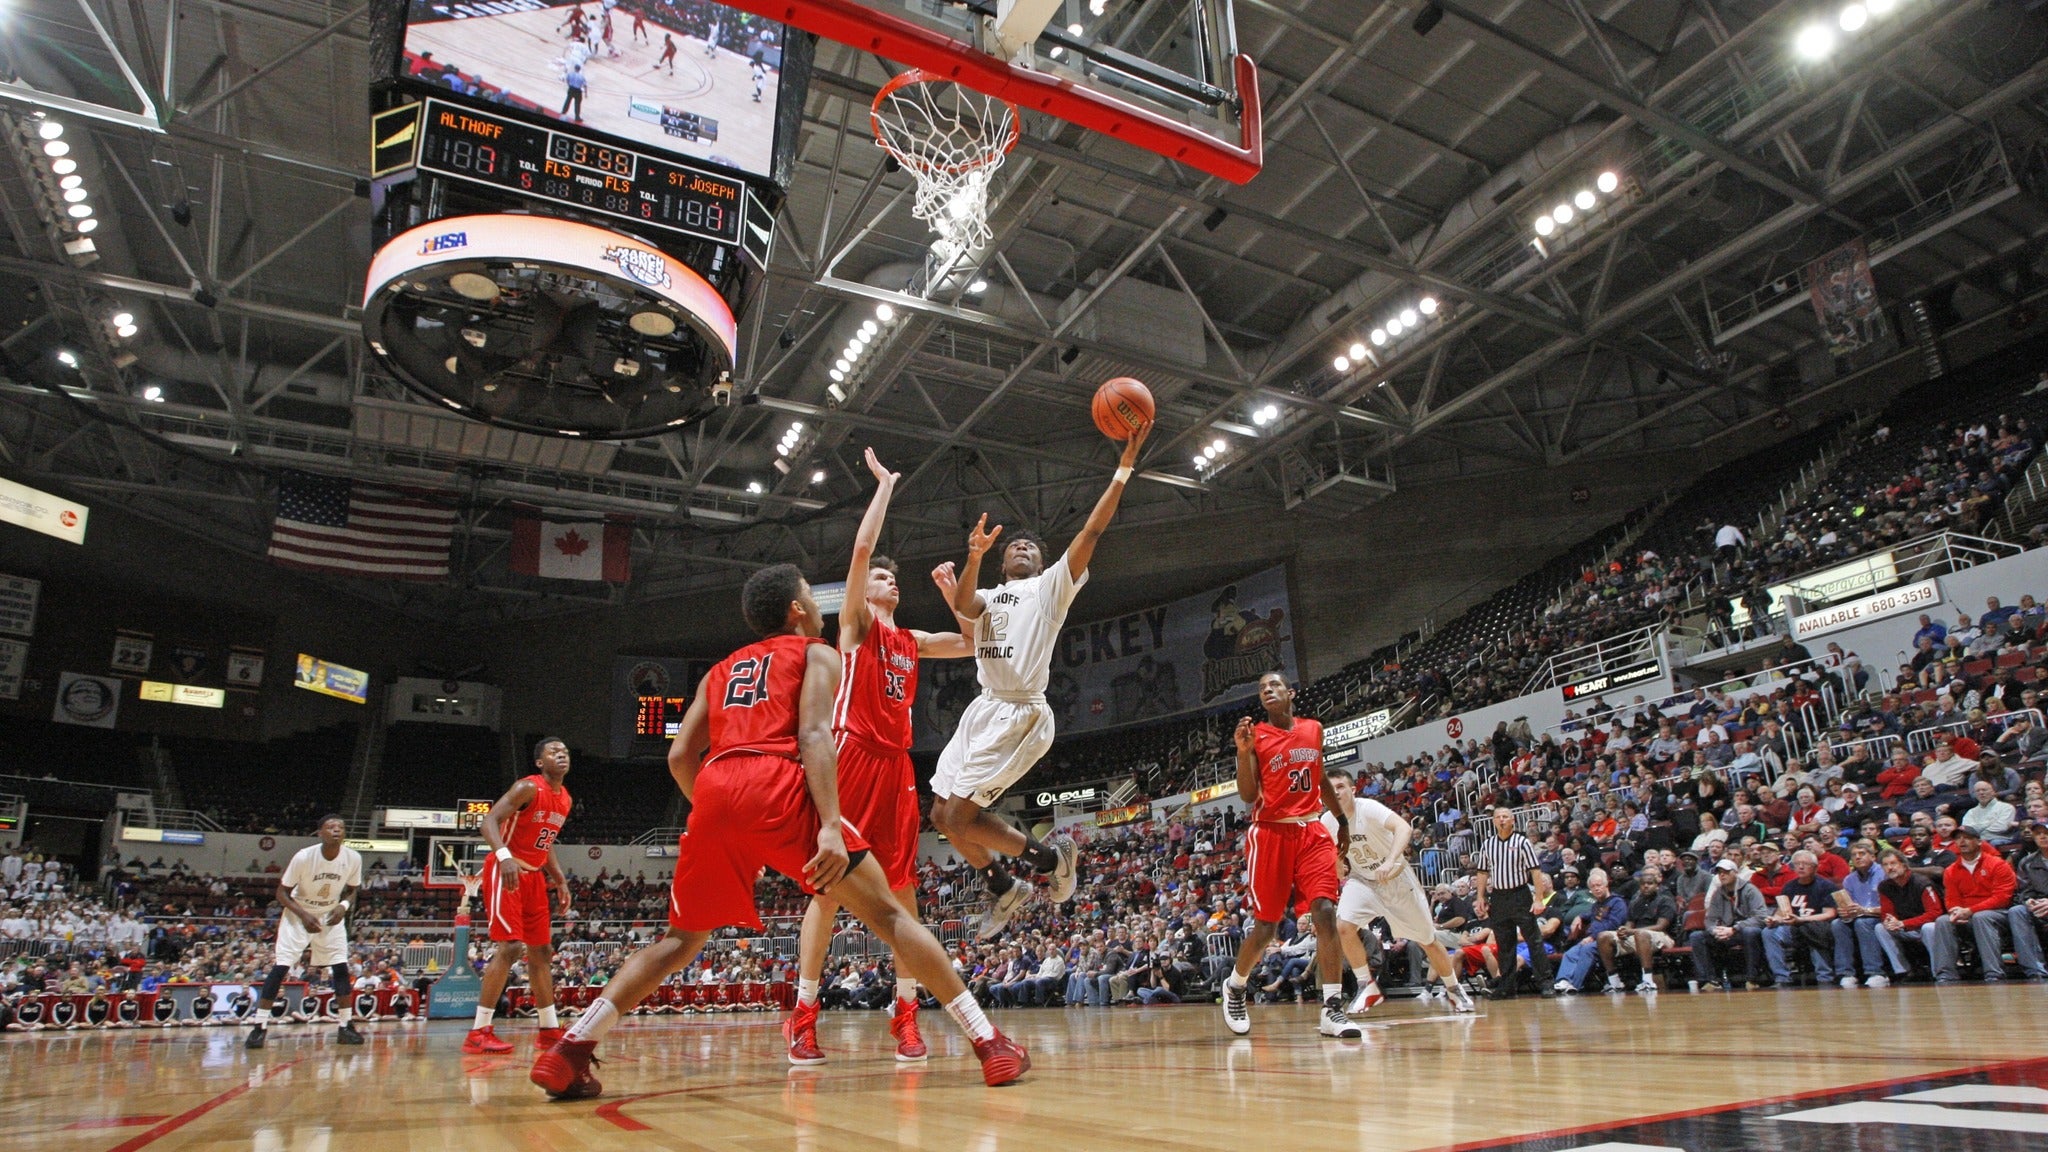 IHSA Basketball Championships - Class 2A Finals in Peoria promo photo for IHSA All-Session presale offer code